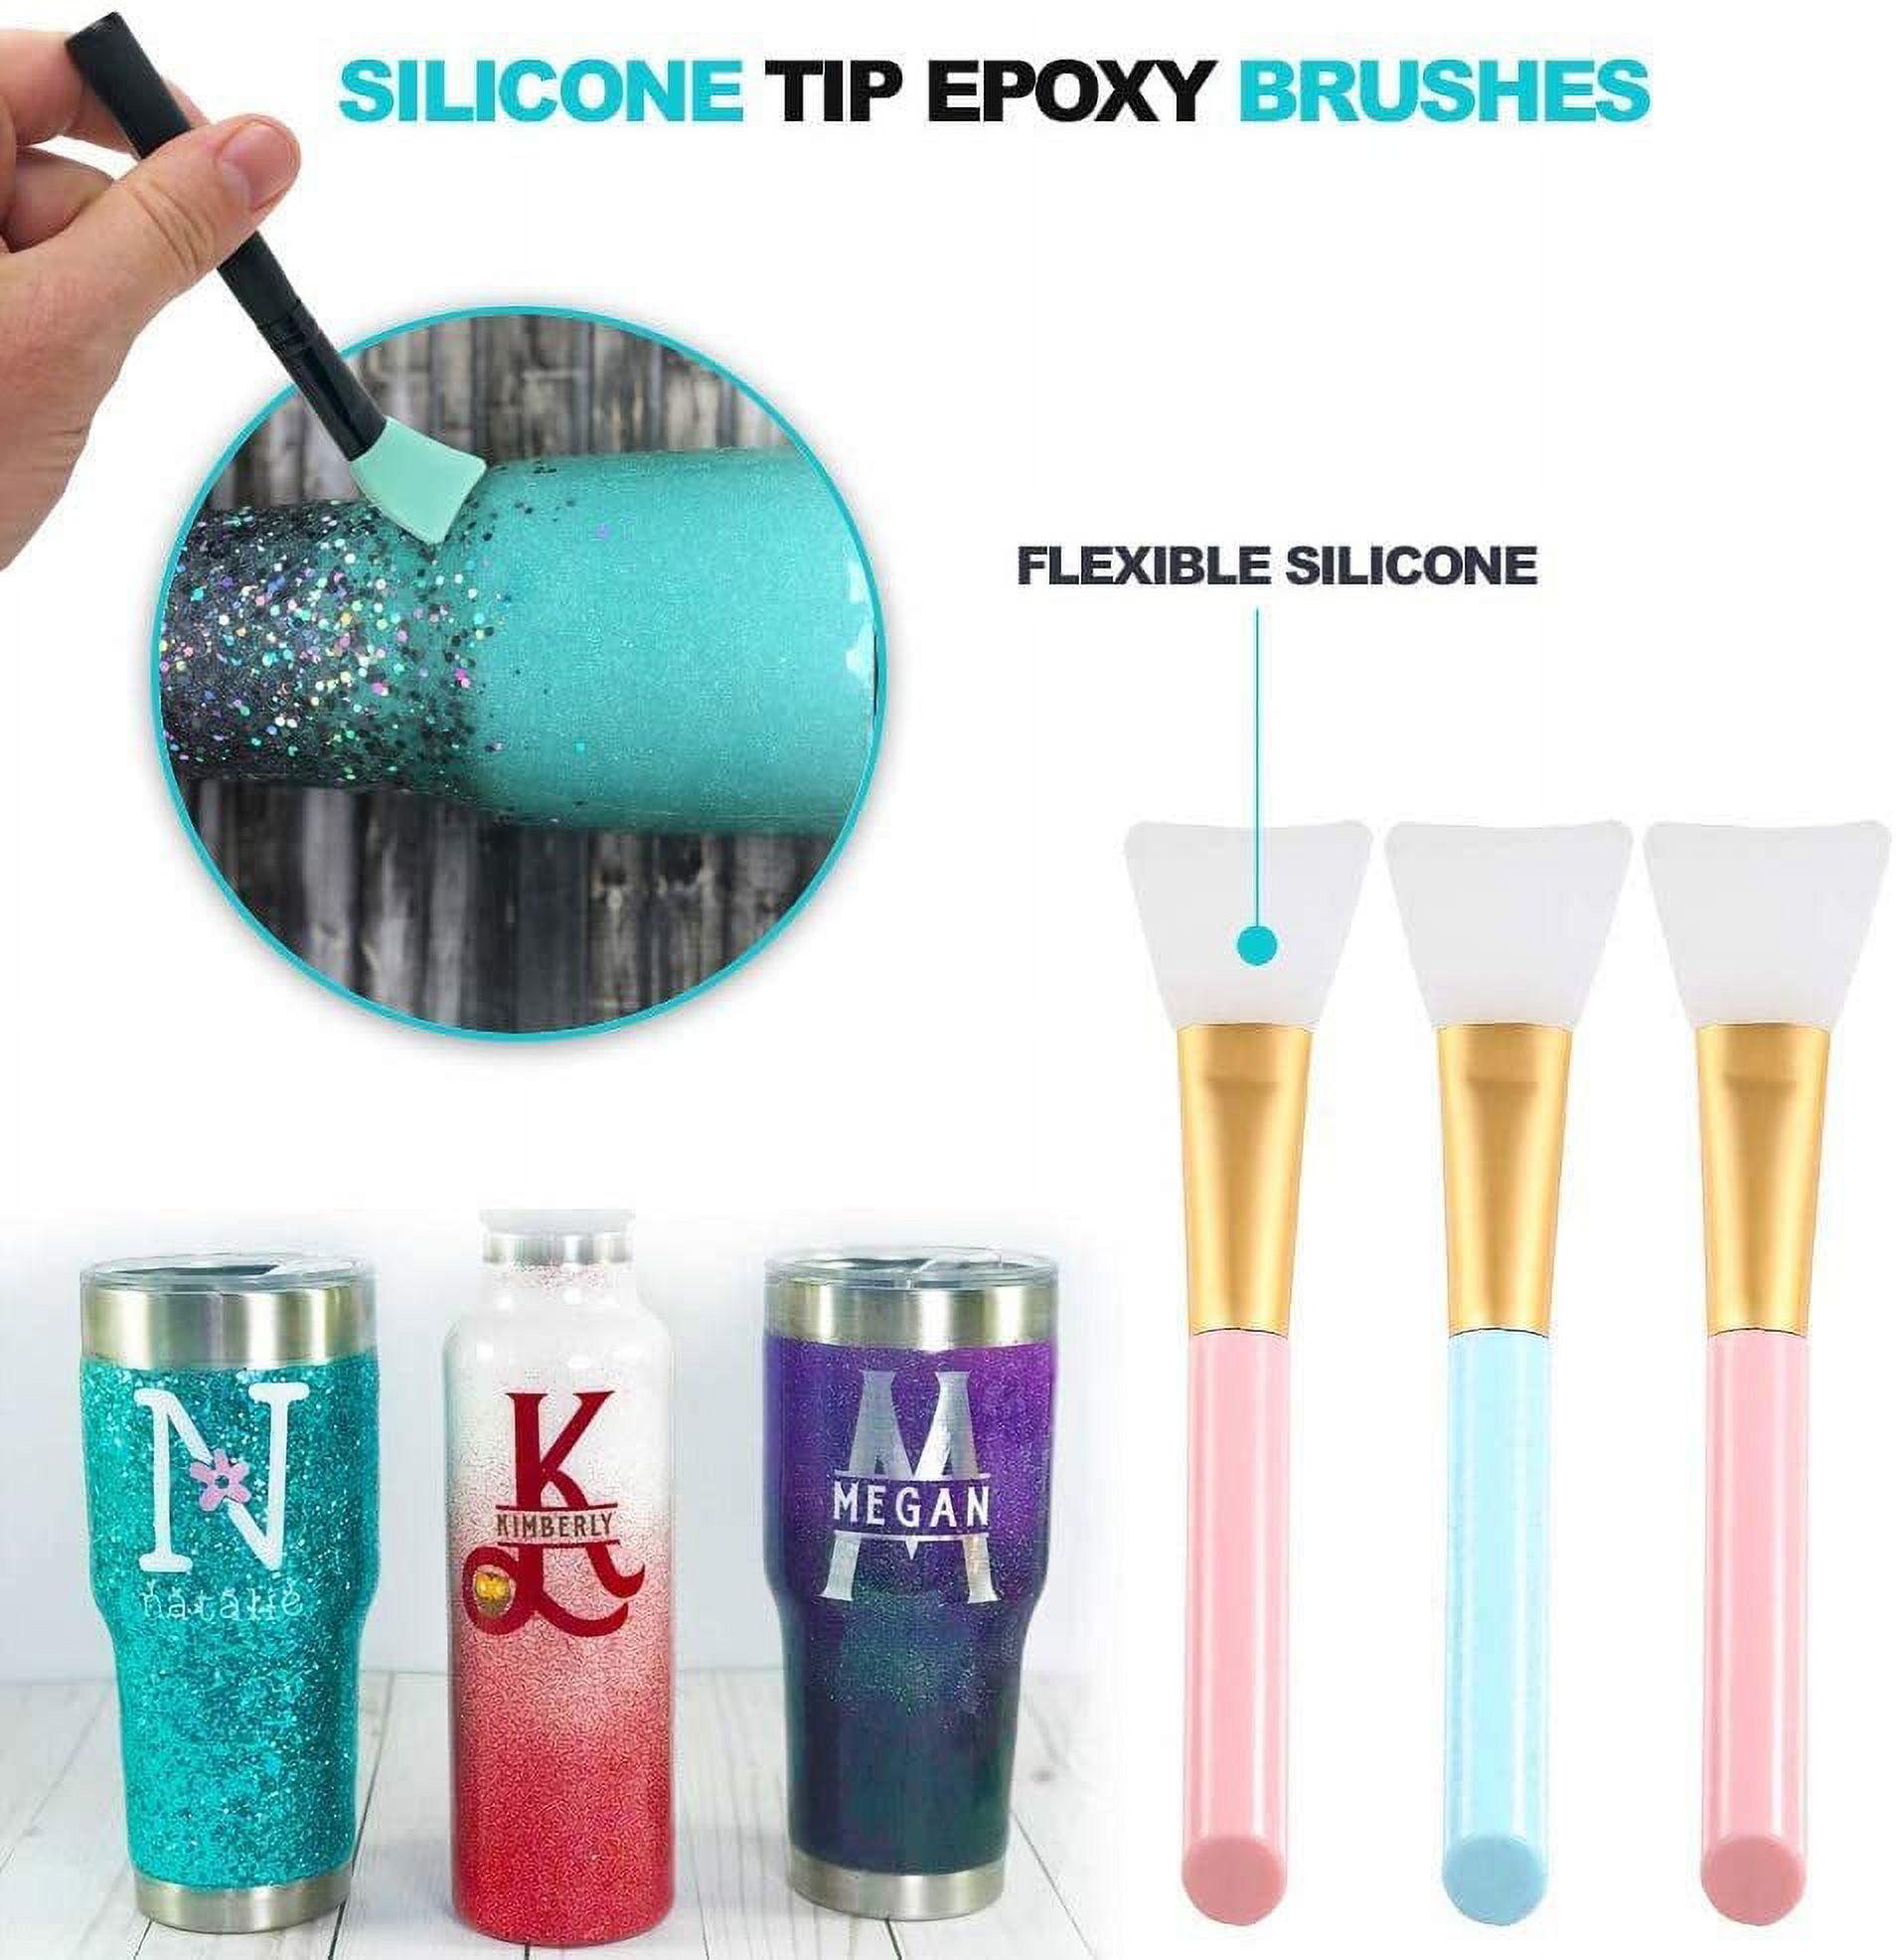 Epoxy Glitter Tumblers Kit Epoxy Heat Tool for Tumblers Bubble Buster, Epoxy Mixing Kit 2X 100ml Silicone Measuring Cups, 10x 1-Ounce Clear Epoxy Resin Mixing Cups, Silicone Epoxy Brushes for Tumblers - image 2 of 8